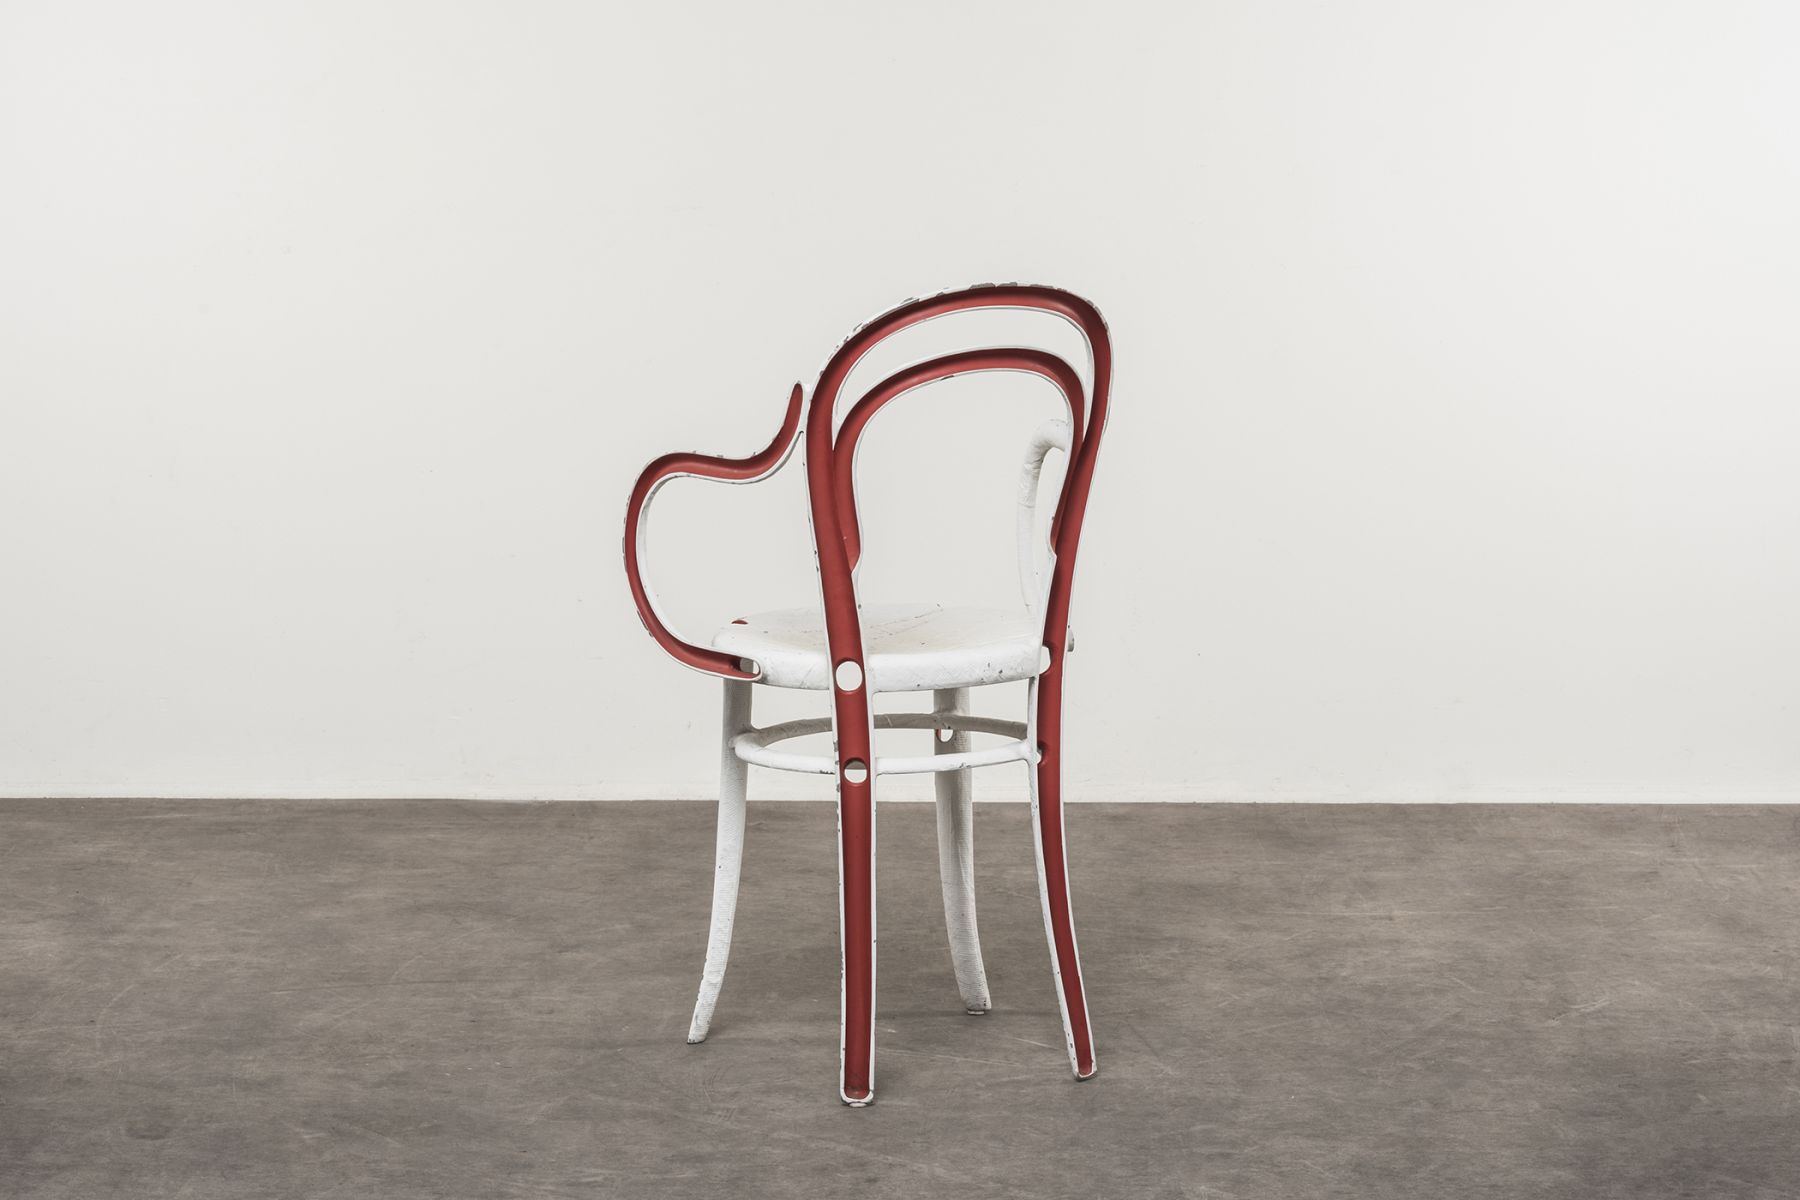 'Re-Thonet 14' chairs with arms Andrea Salvetti pic-4